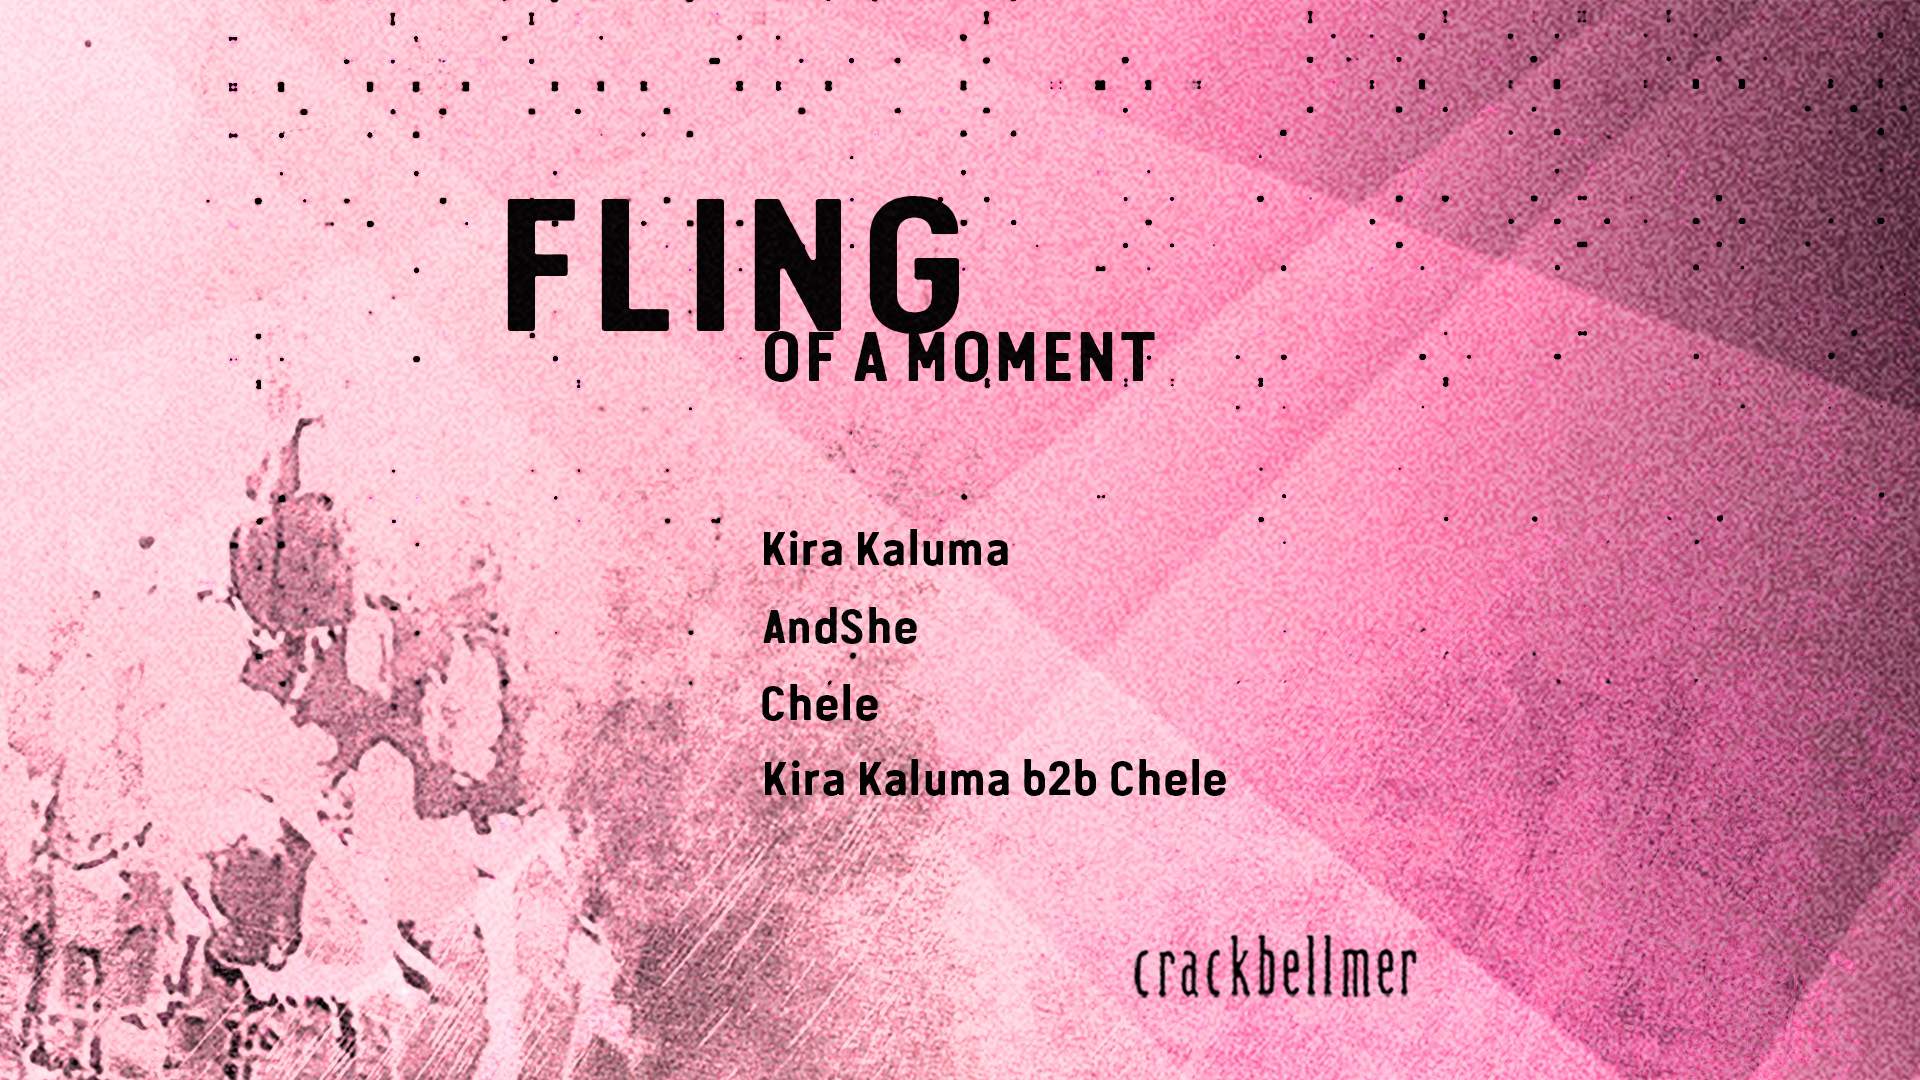 Fling of a Moment with Kira Kaluma, AndShe, Chele - フライヤー表